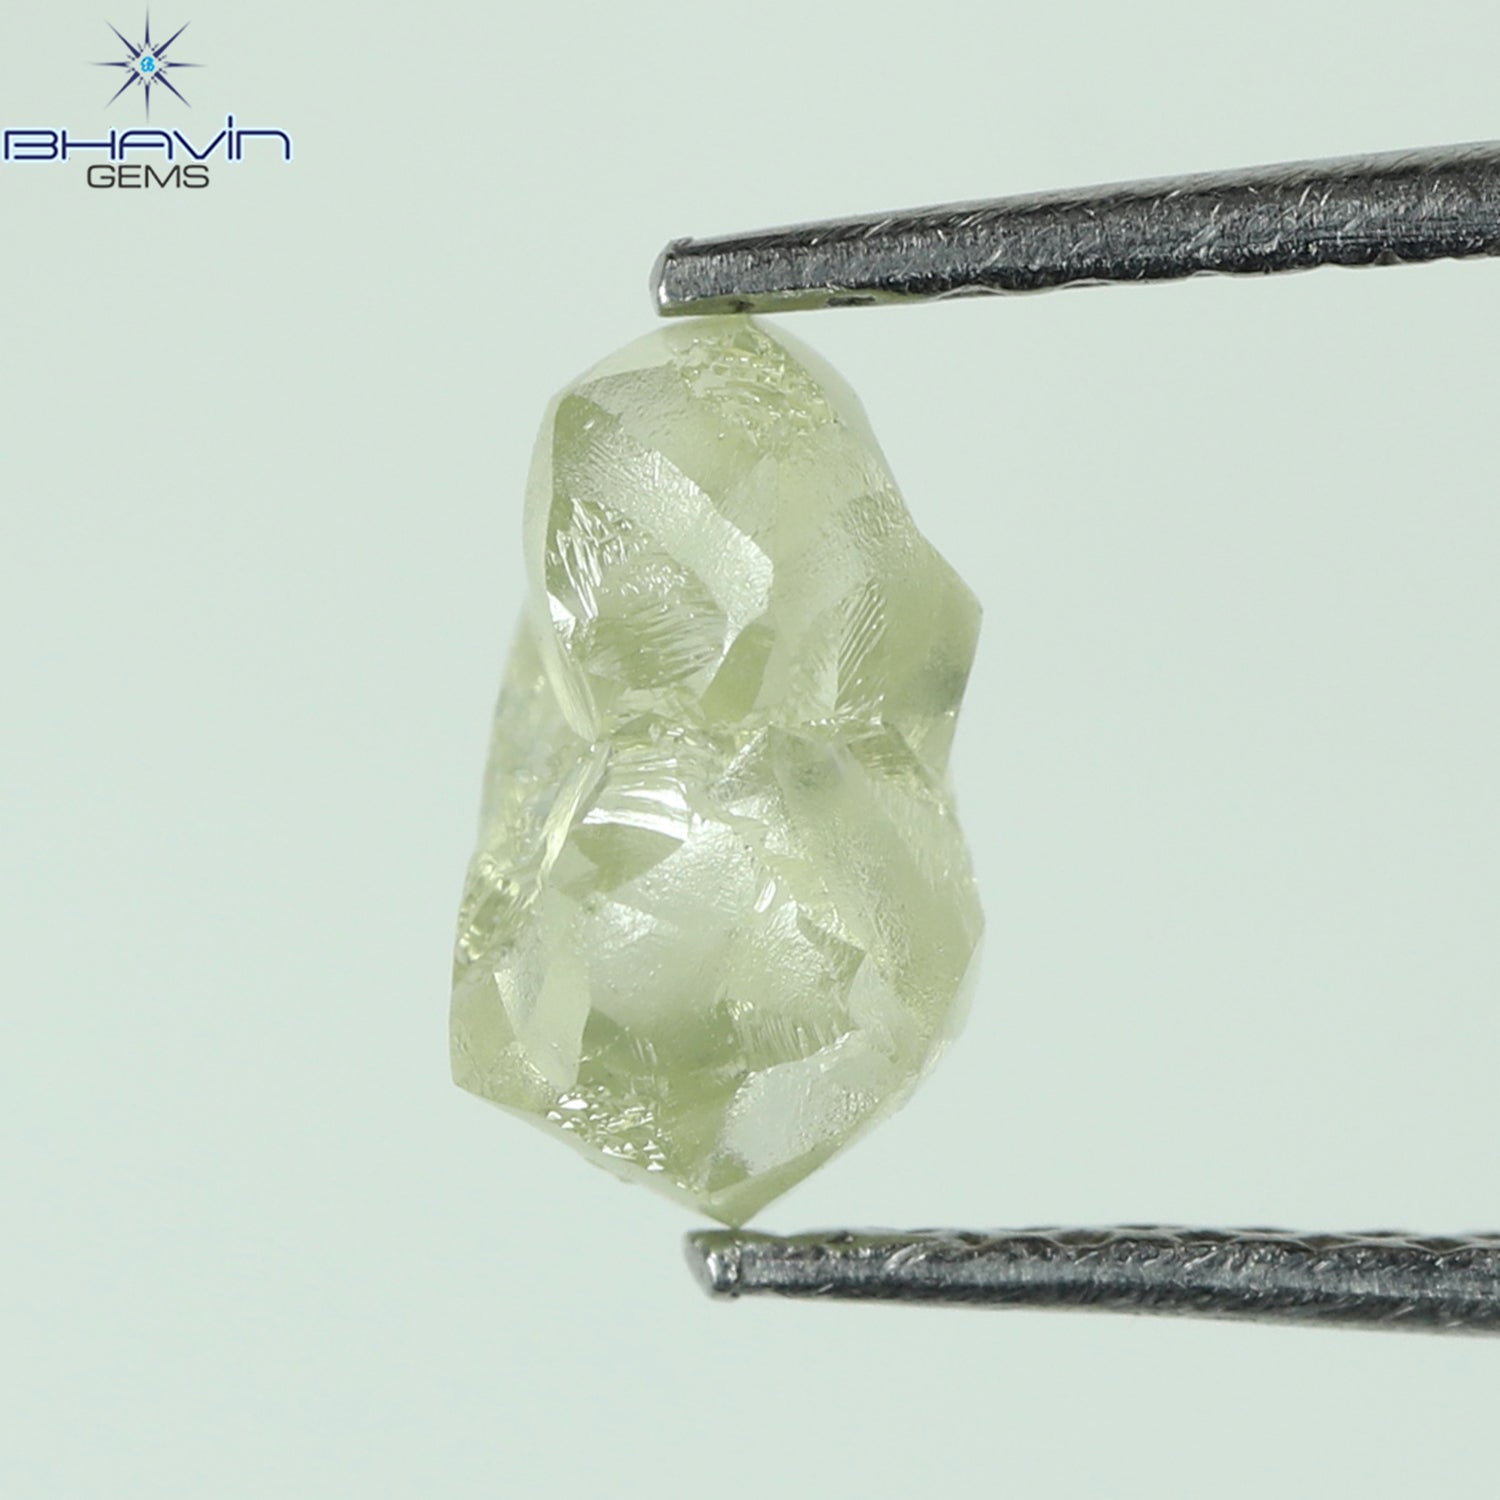 0.86 CT Rough Shape Natural Diamond Yellow Color VS2 Clarity (6.89 MM)